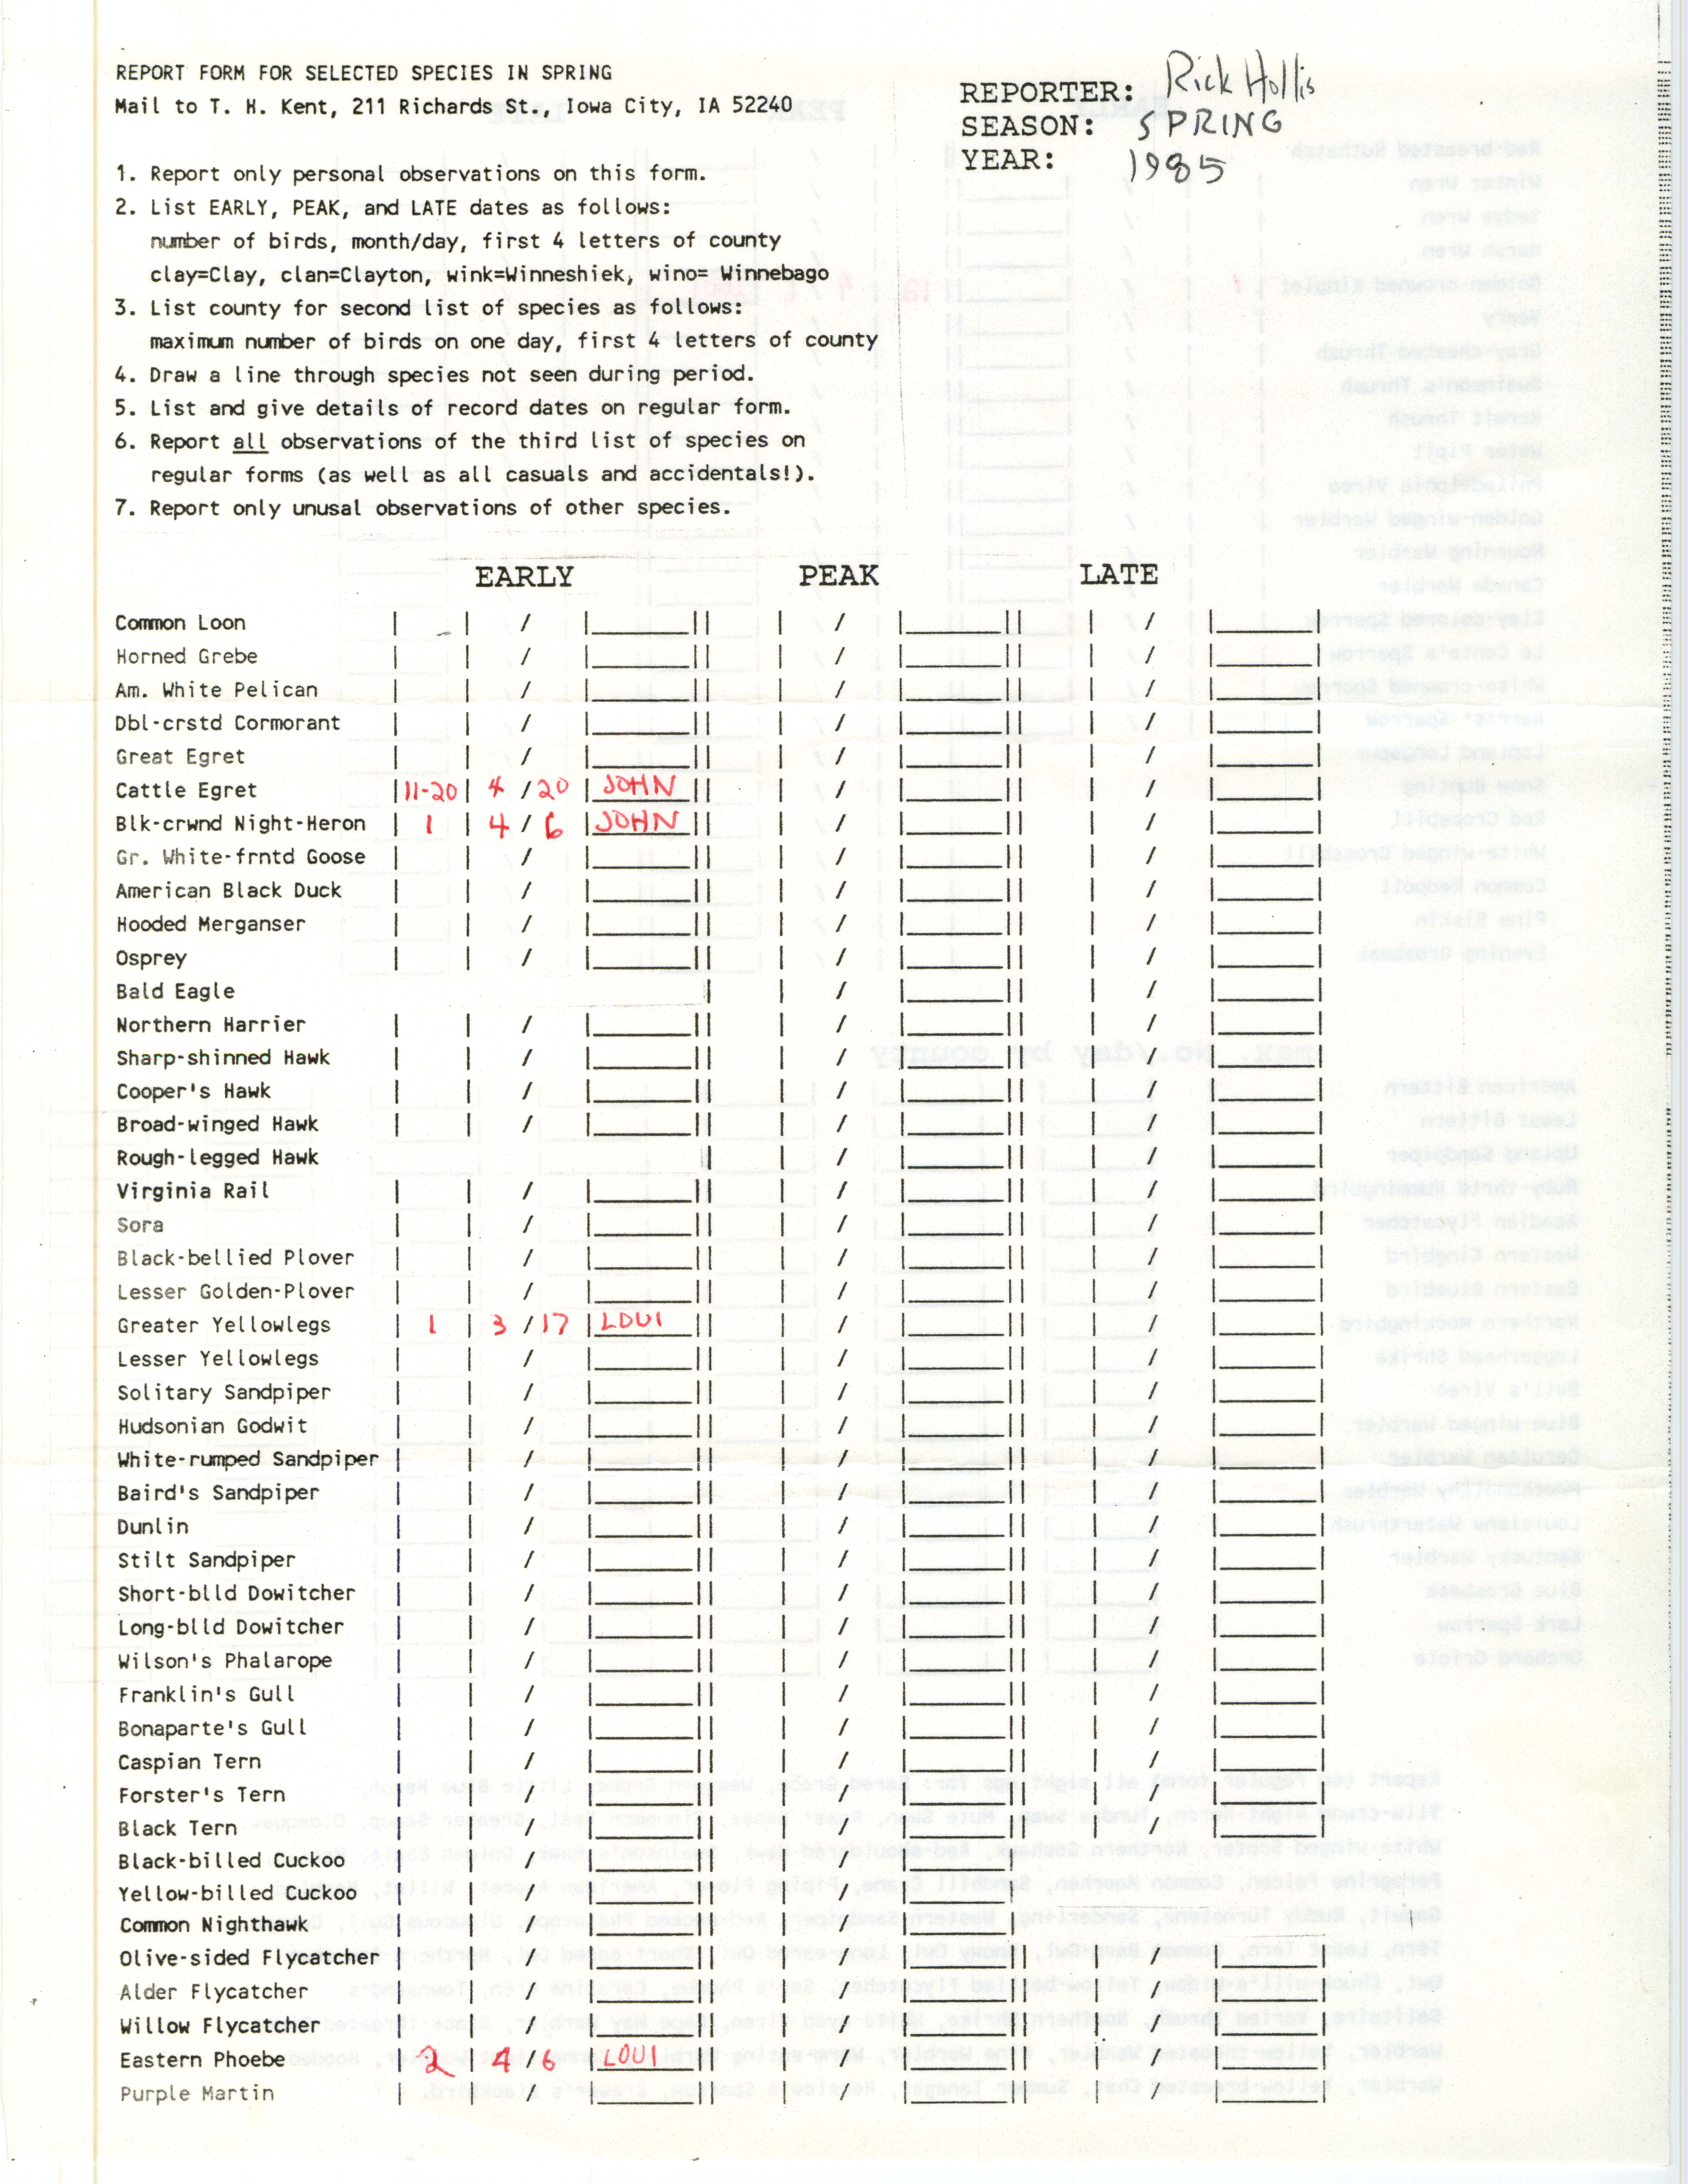 Report form for selected species in spring, contributed by Richard Jule Hollis, spring 1985